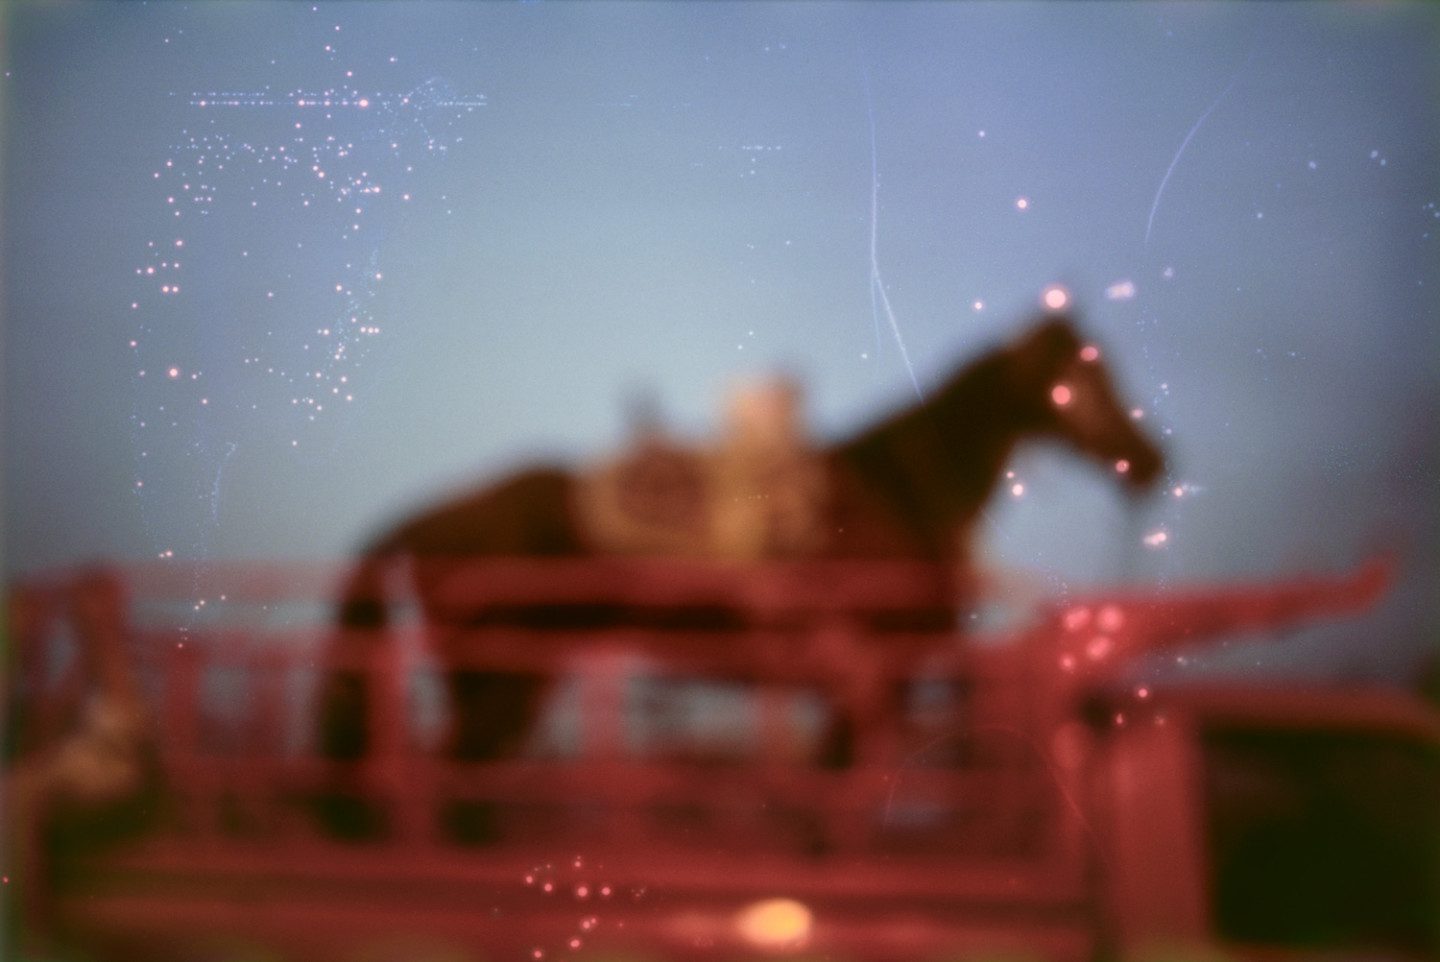 A horse against a blurred foreground